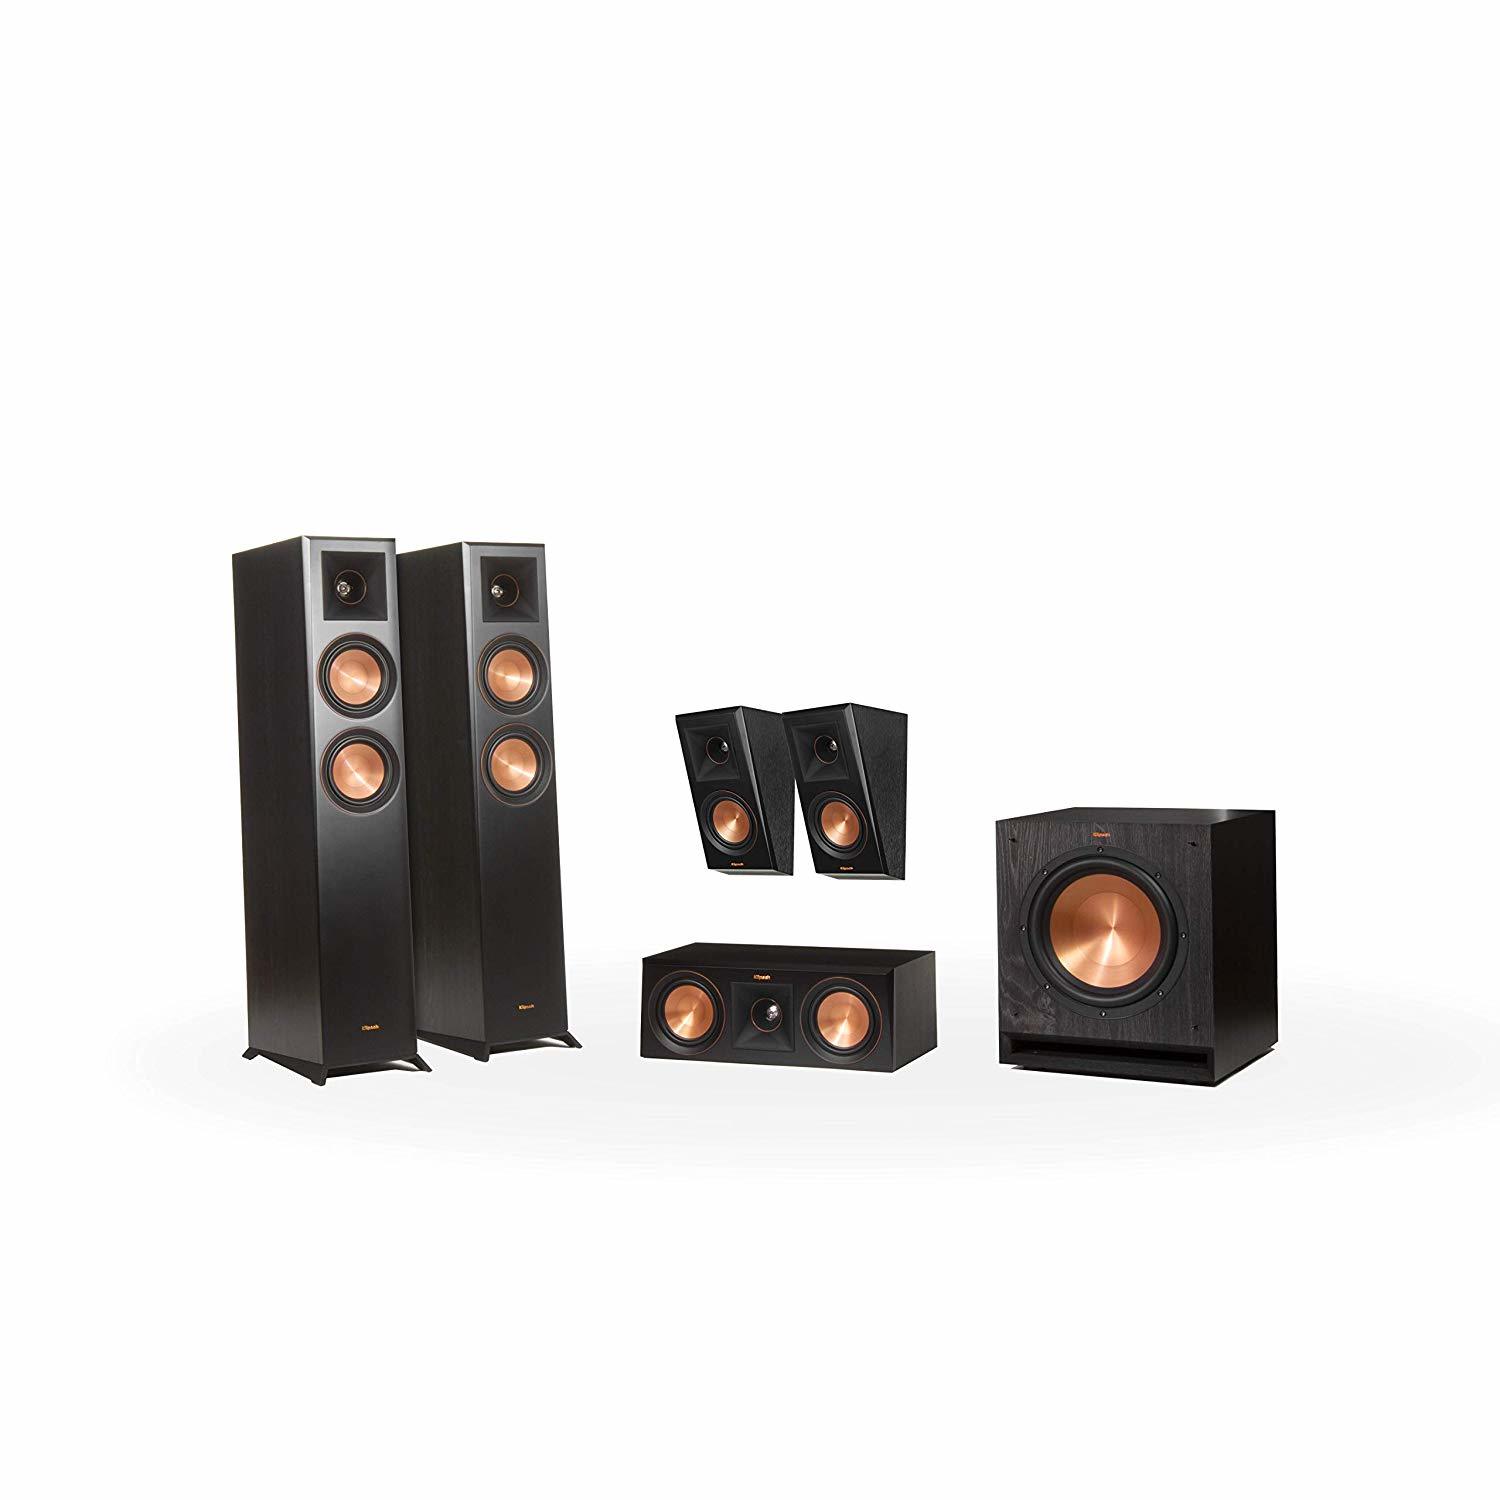 RP-5000F 5.1 Home Theater System | Klipsch